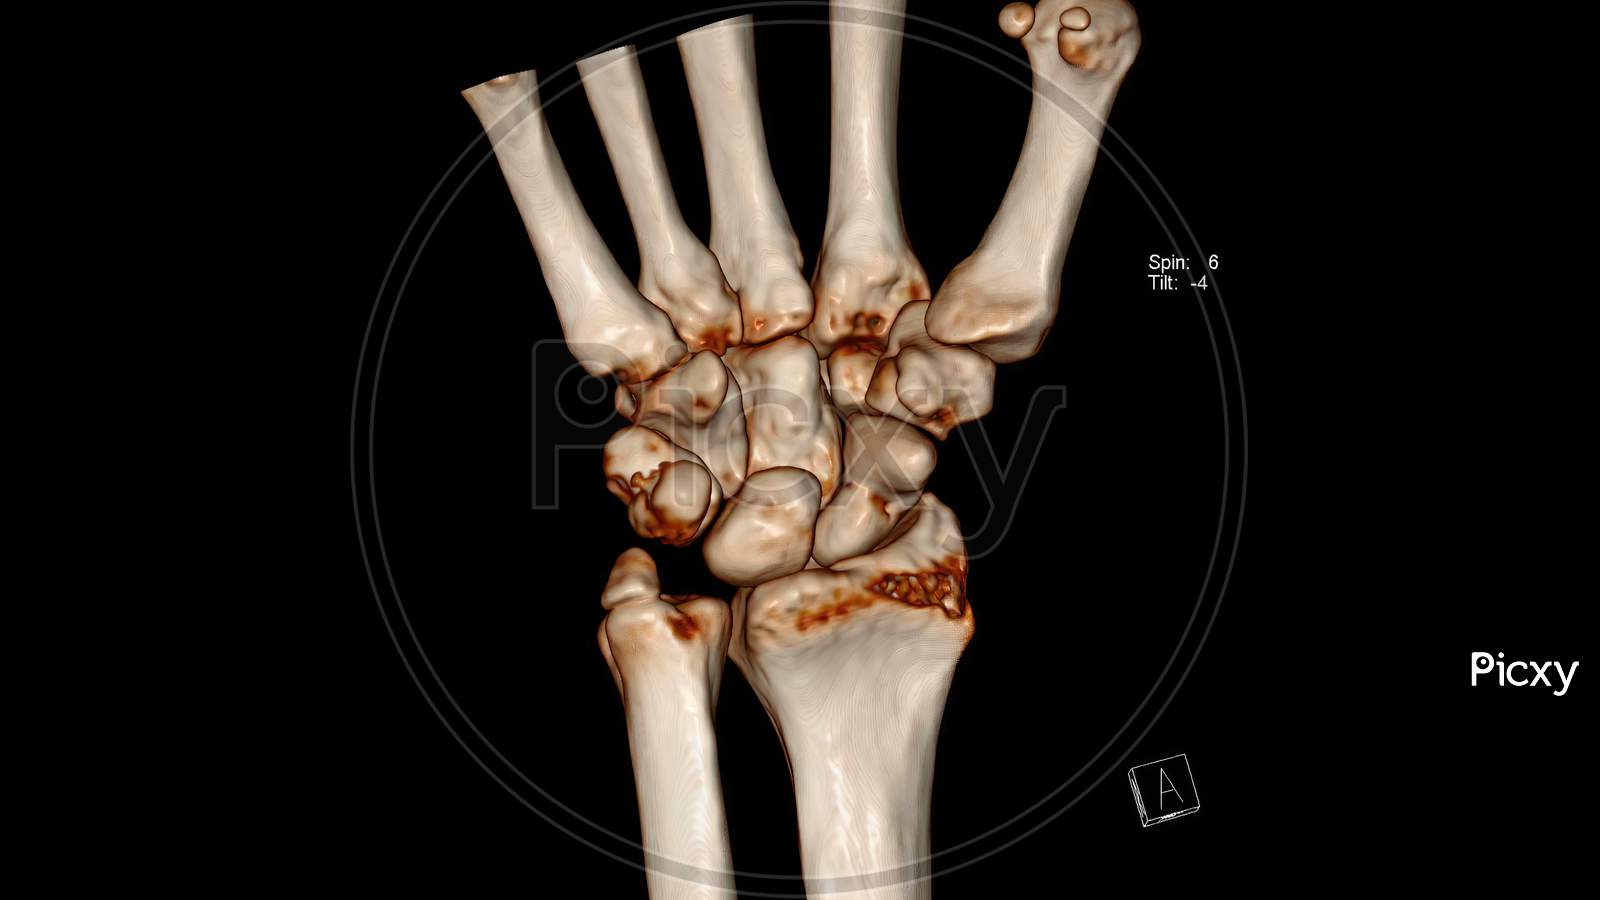 Radiology examination, Computed Tomography Volume Rendering examination of the wrist joint ( CT VR wrist) showing fracture of the scaphoid bone and ulnar styloid process